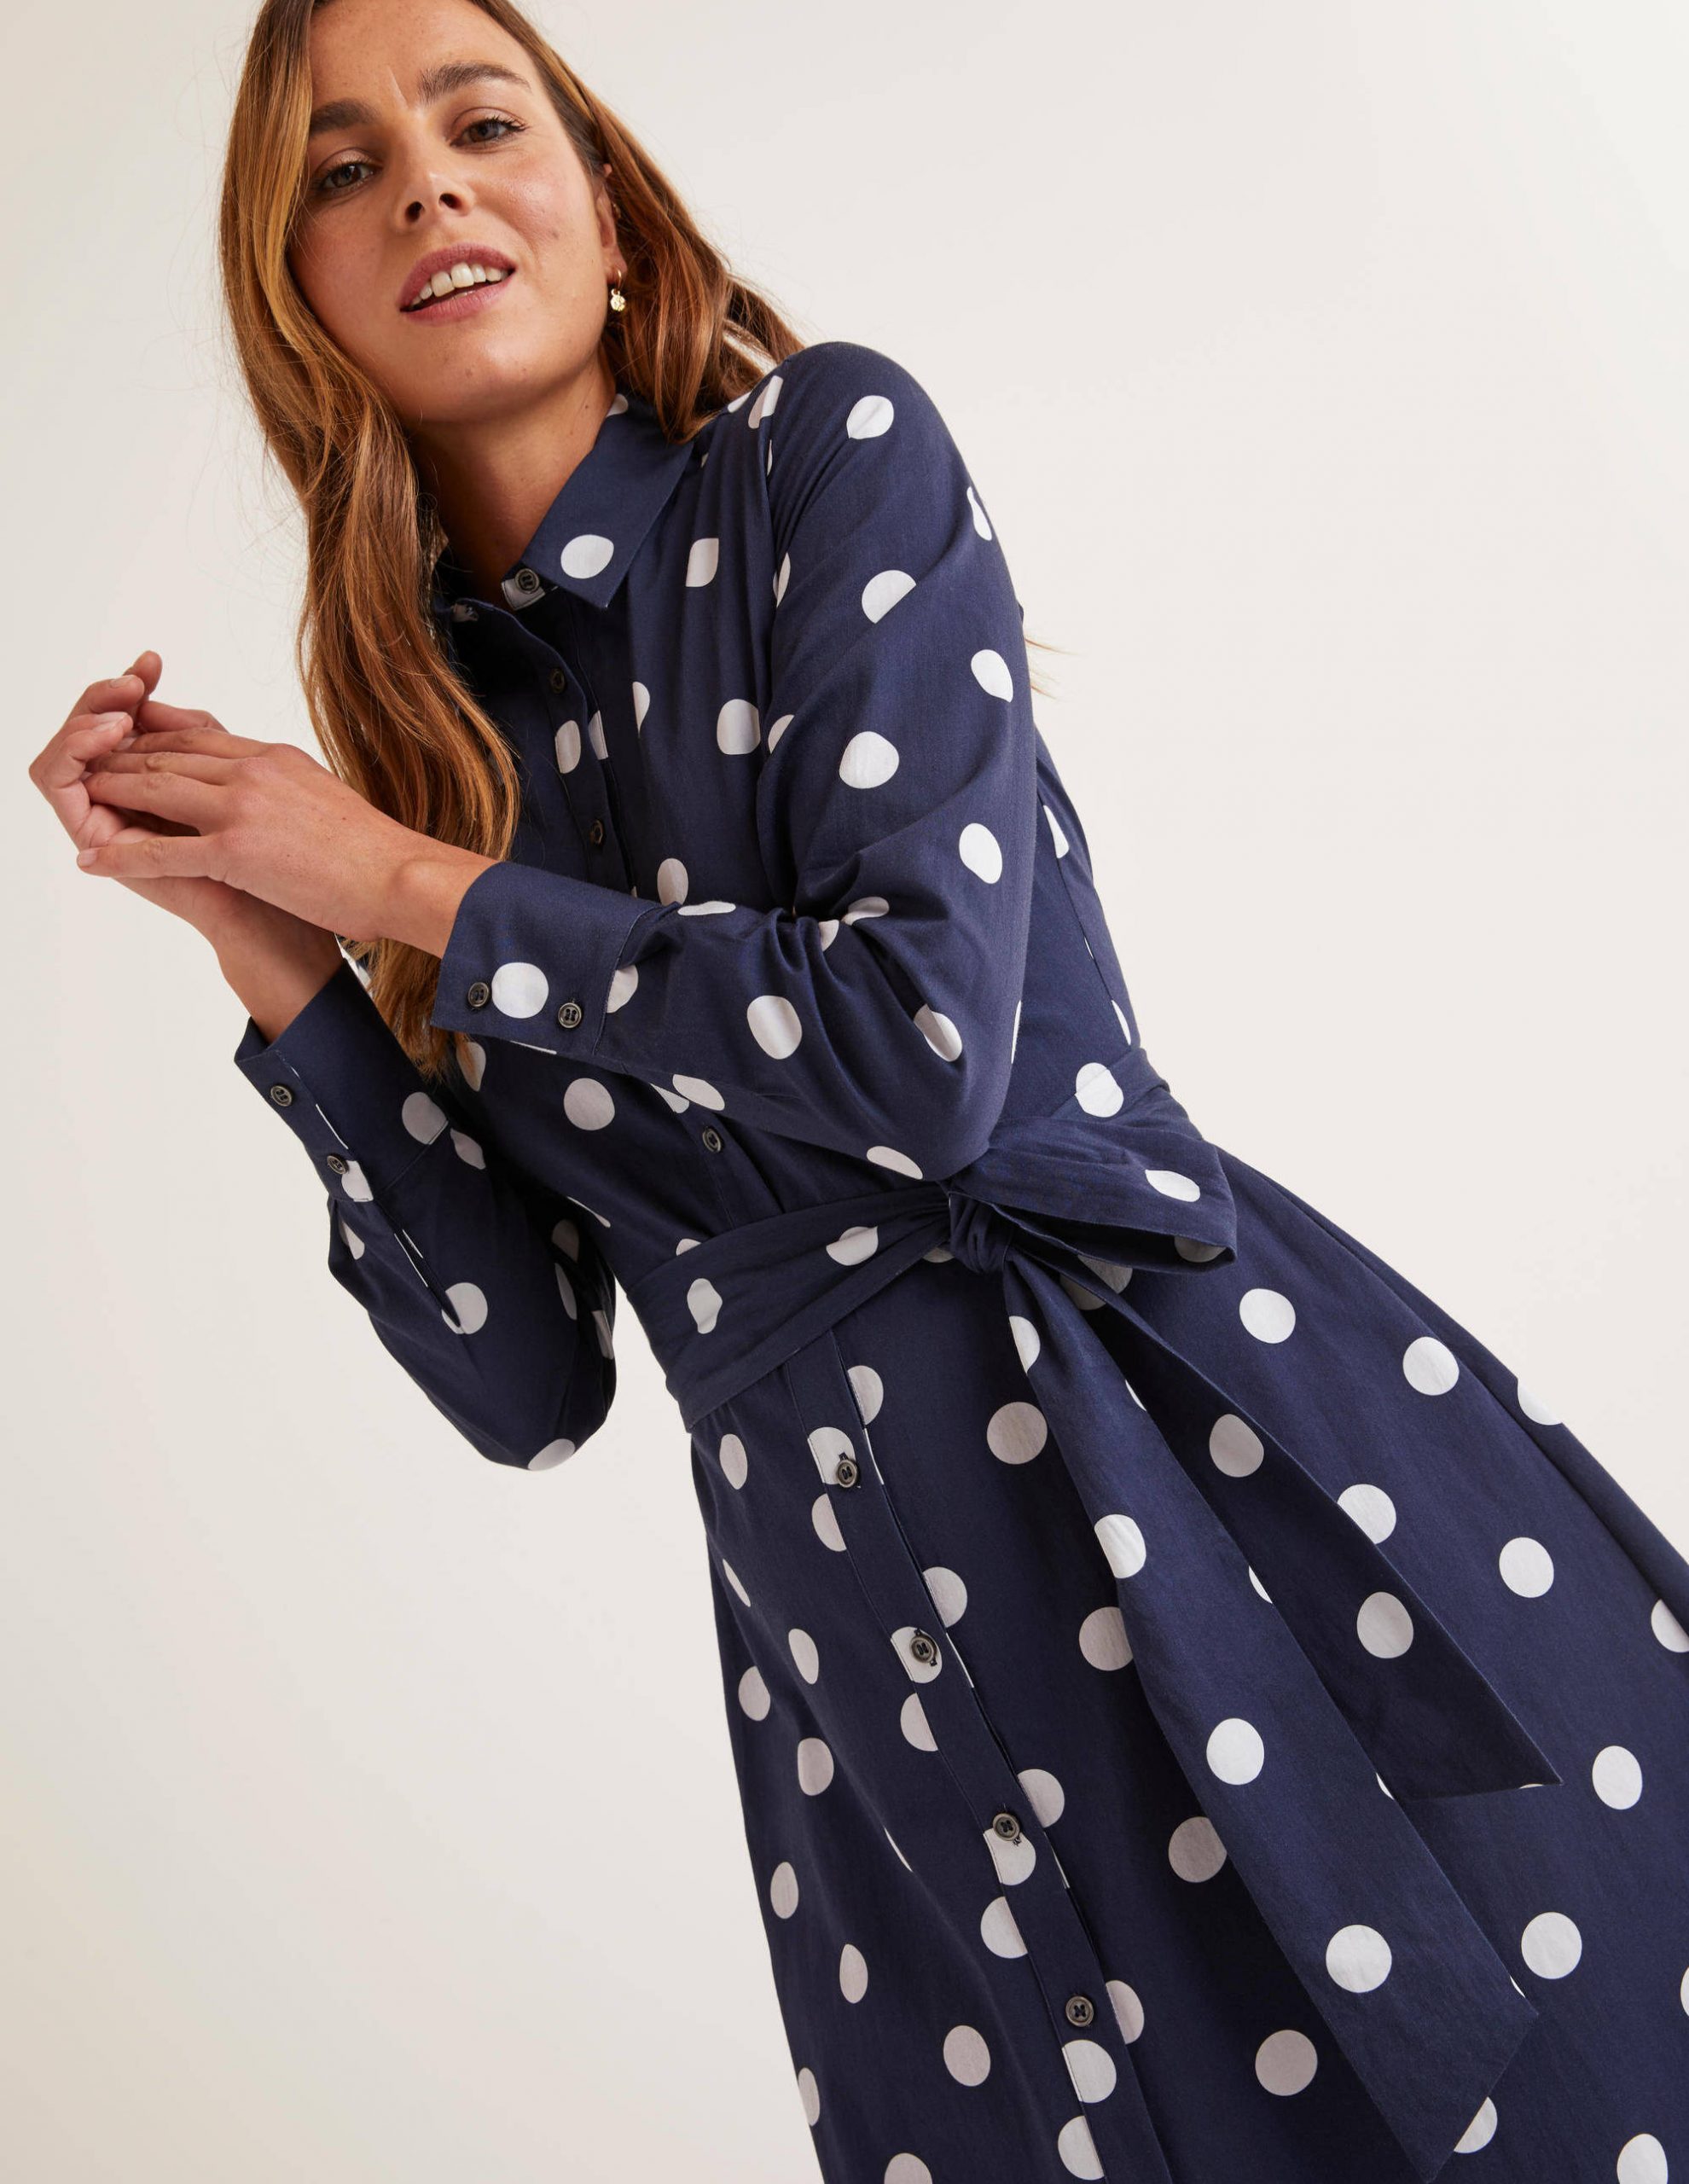 Boden's chic polka dot shirt dress is your next spring essential ...